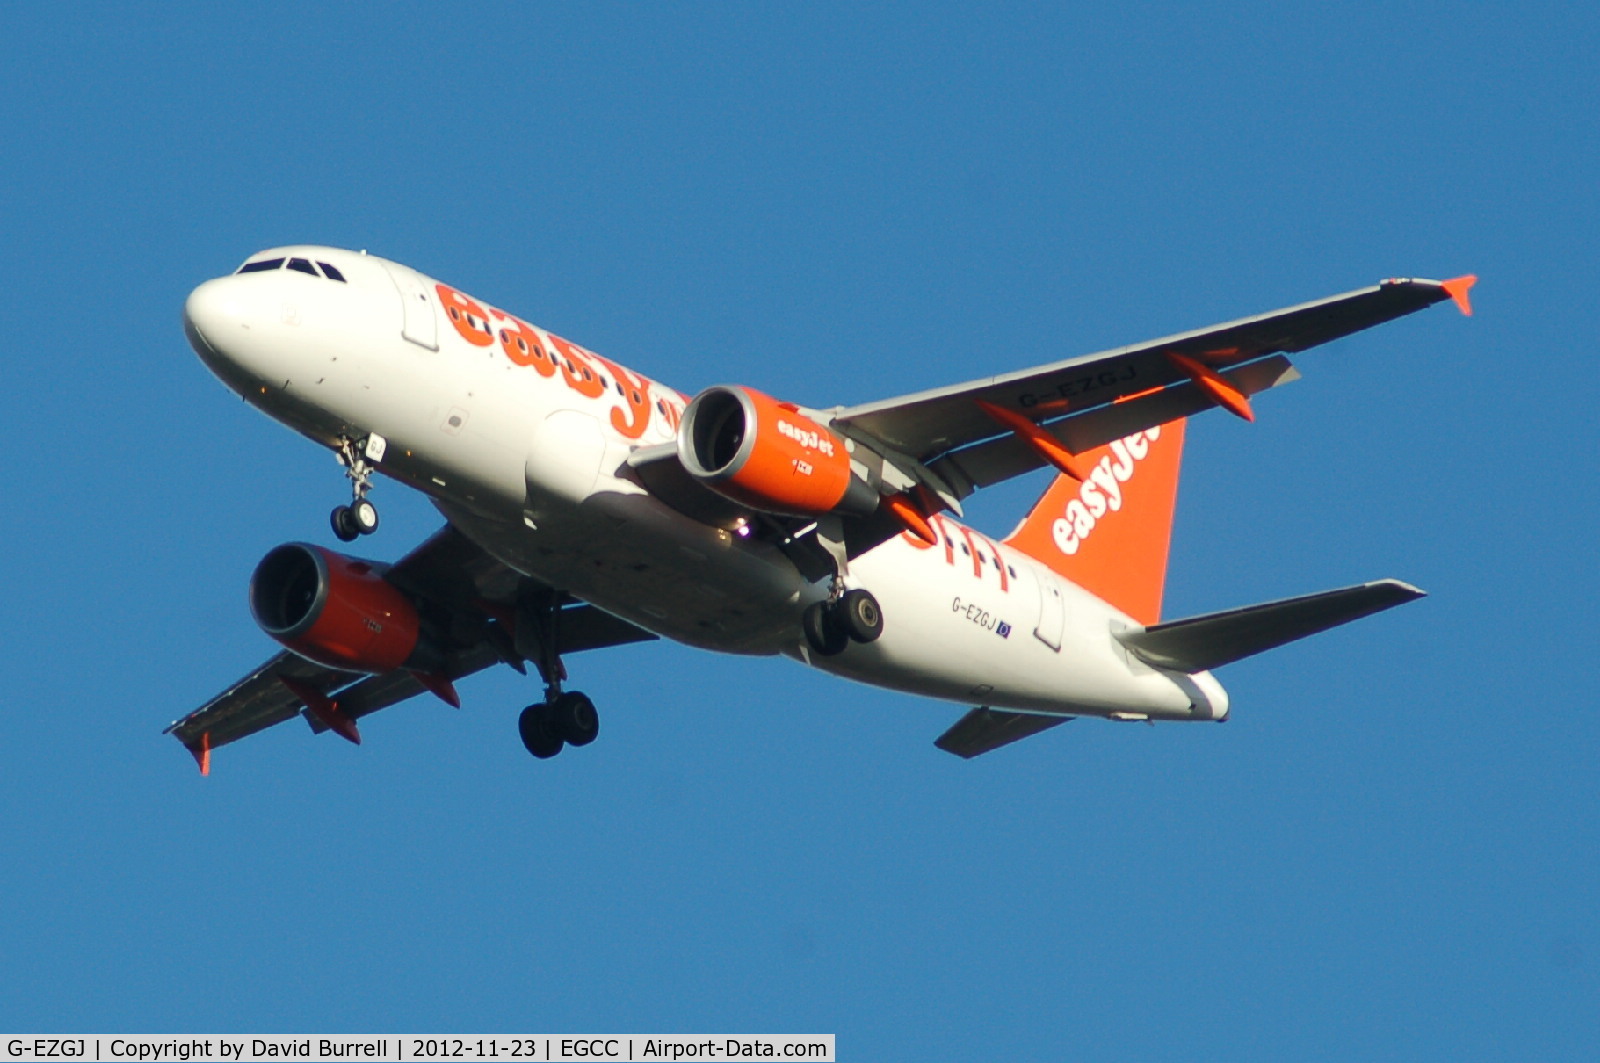 G-EZGJ, 2011 Airbus A319-111 C/N 4705, G-EZGJ Easyjet Airbus A319-111 on approach to Manchester Airport.